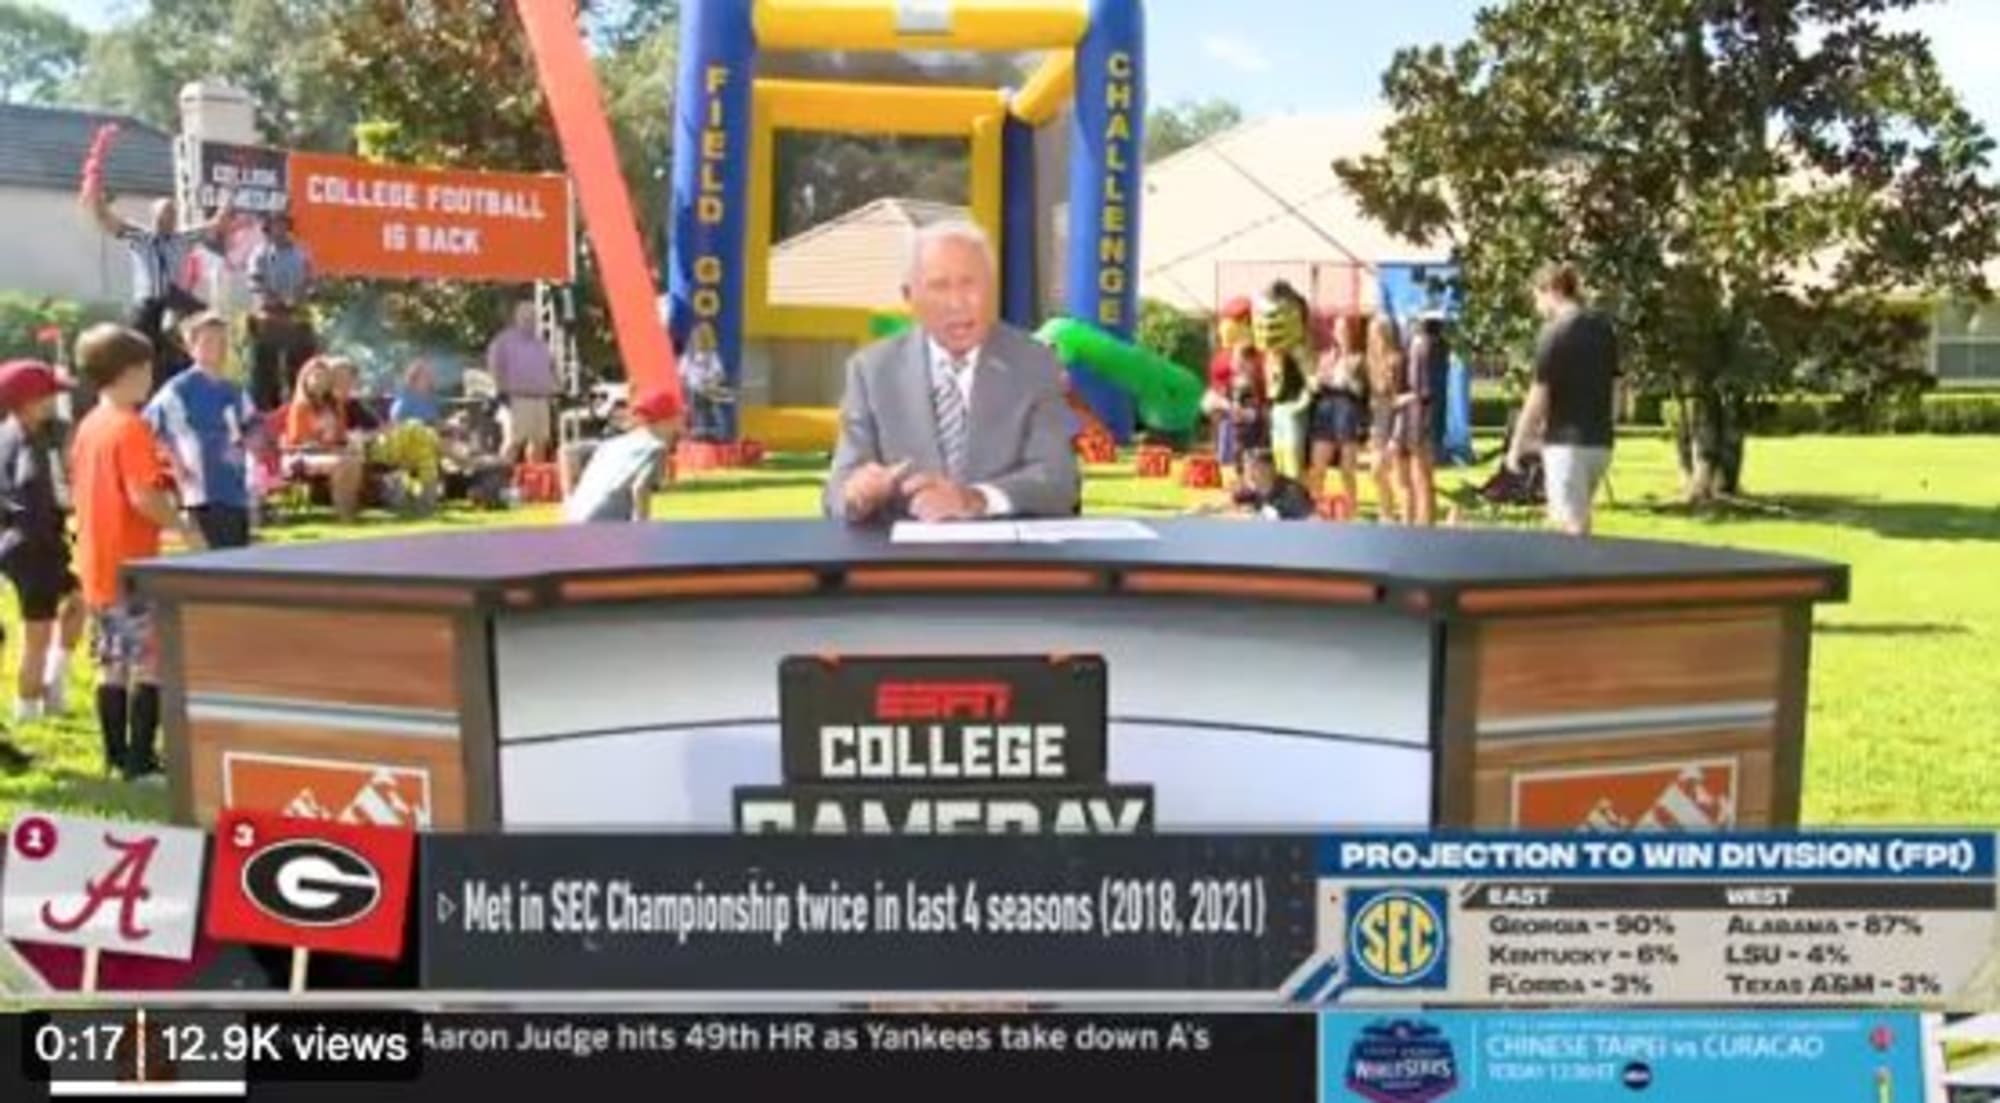 Lee Corso deserves so much better from College Gameday